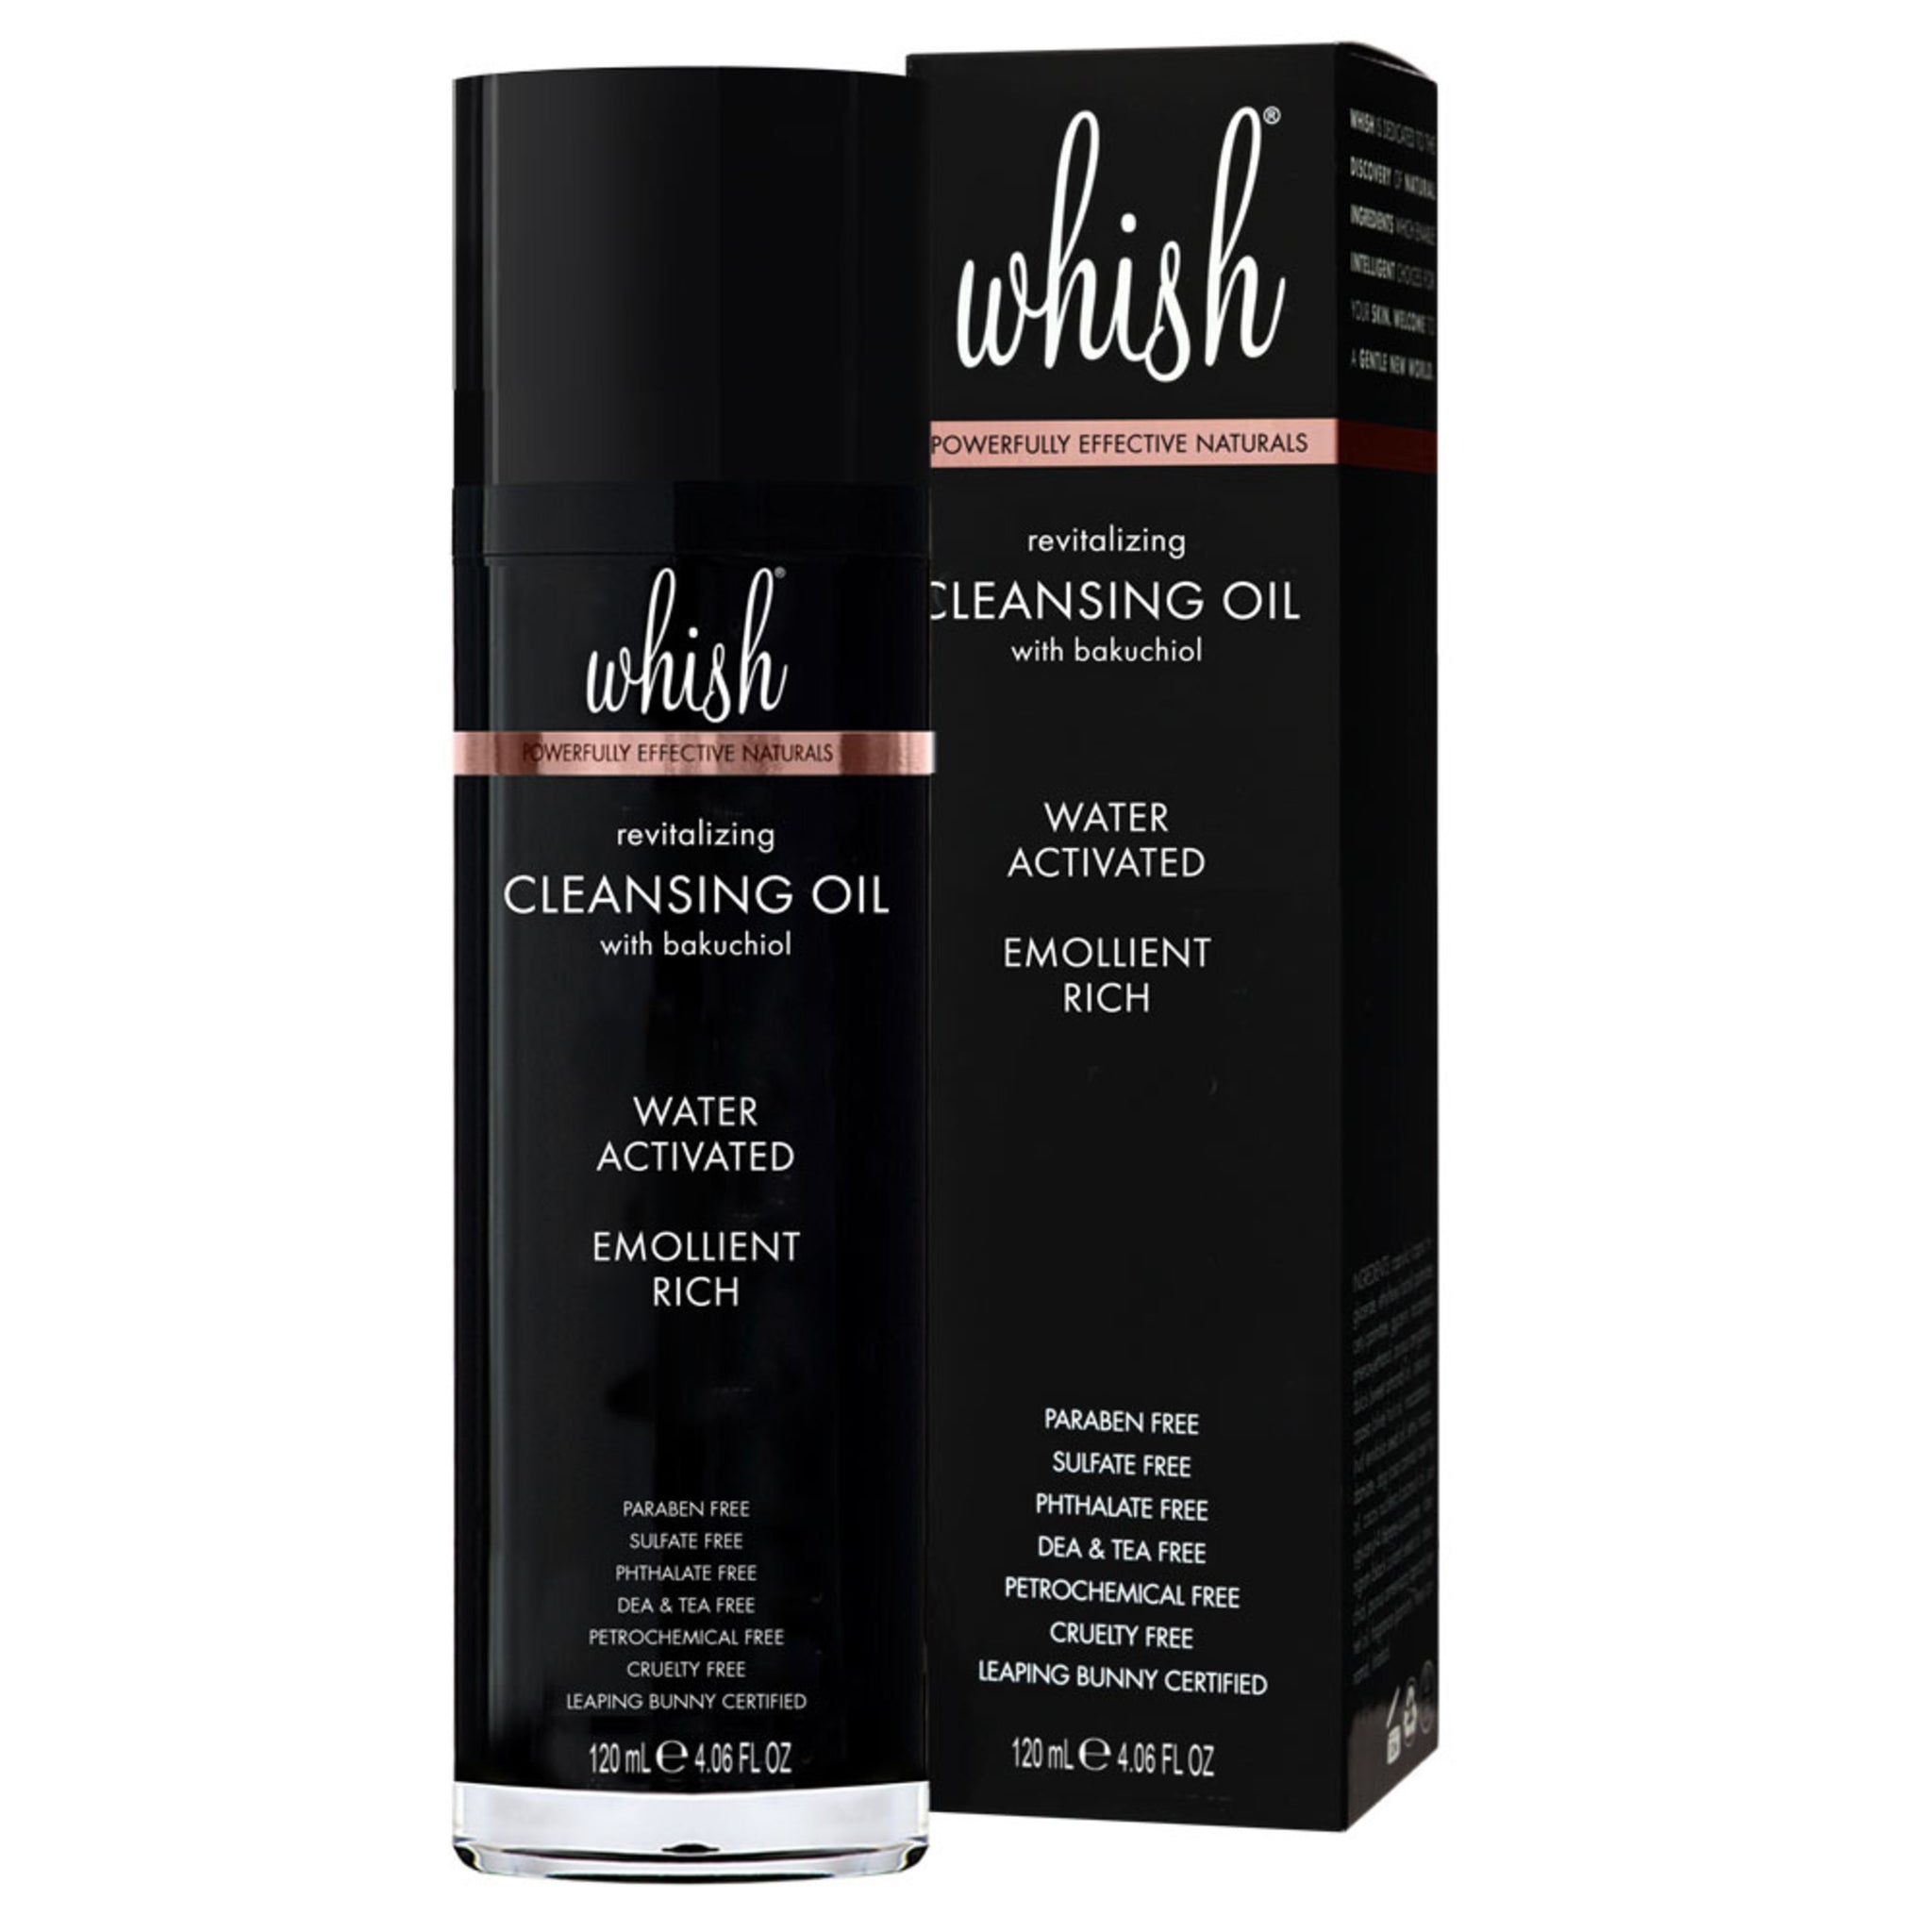 Revitalizing Cleansing Oil with Bakuchiol